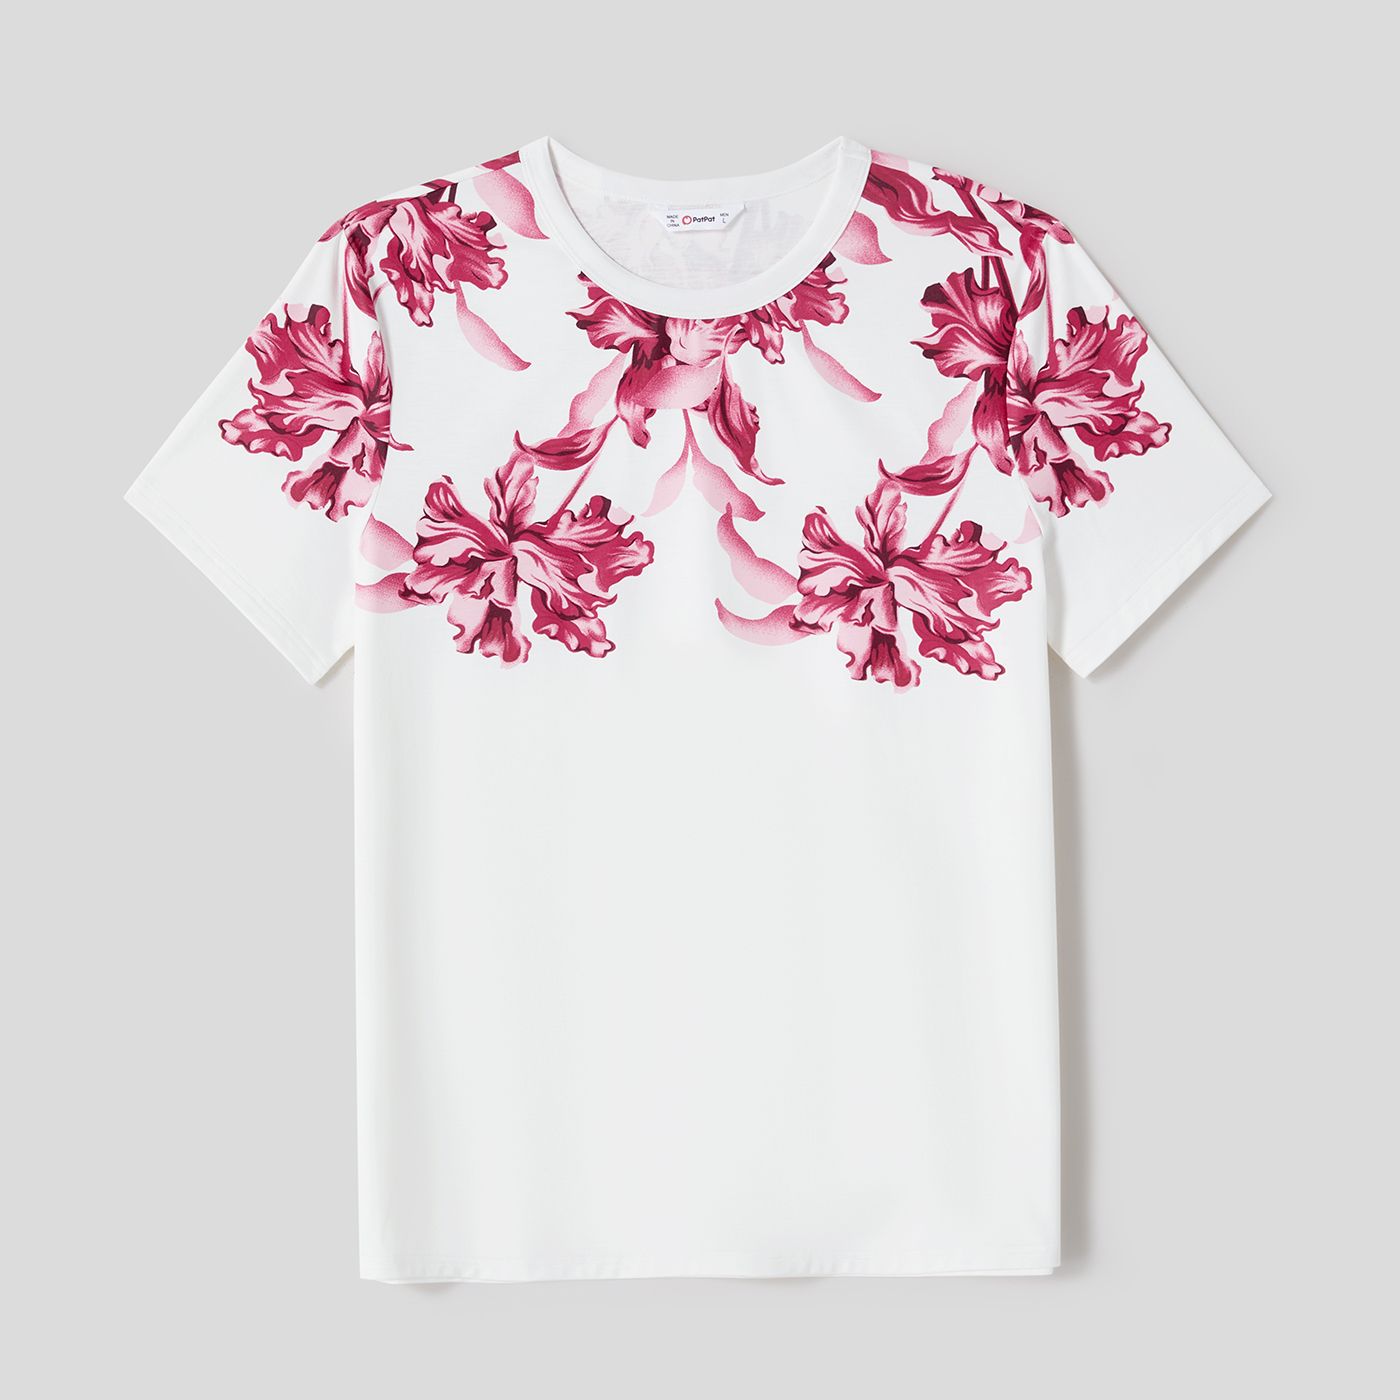 Family Matching Solid Ribbed Spliced Floral Print Naiaâ¢ Dresses And Short-sleeve T-shirts Sets